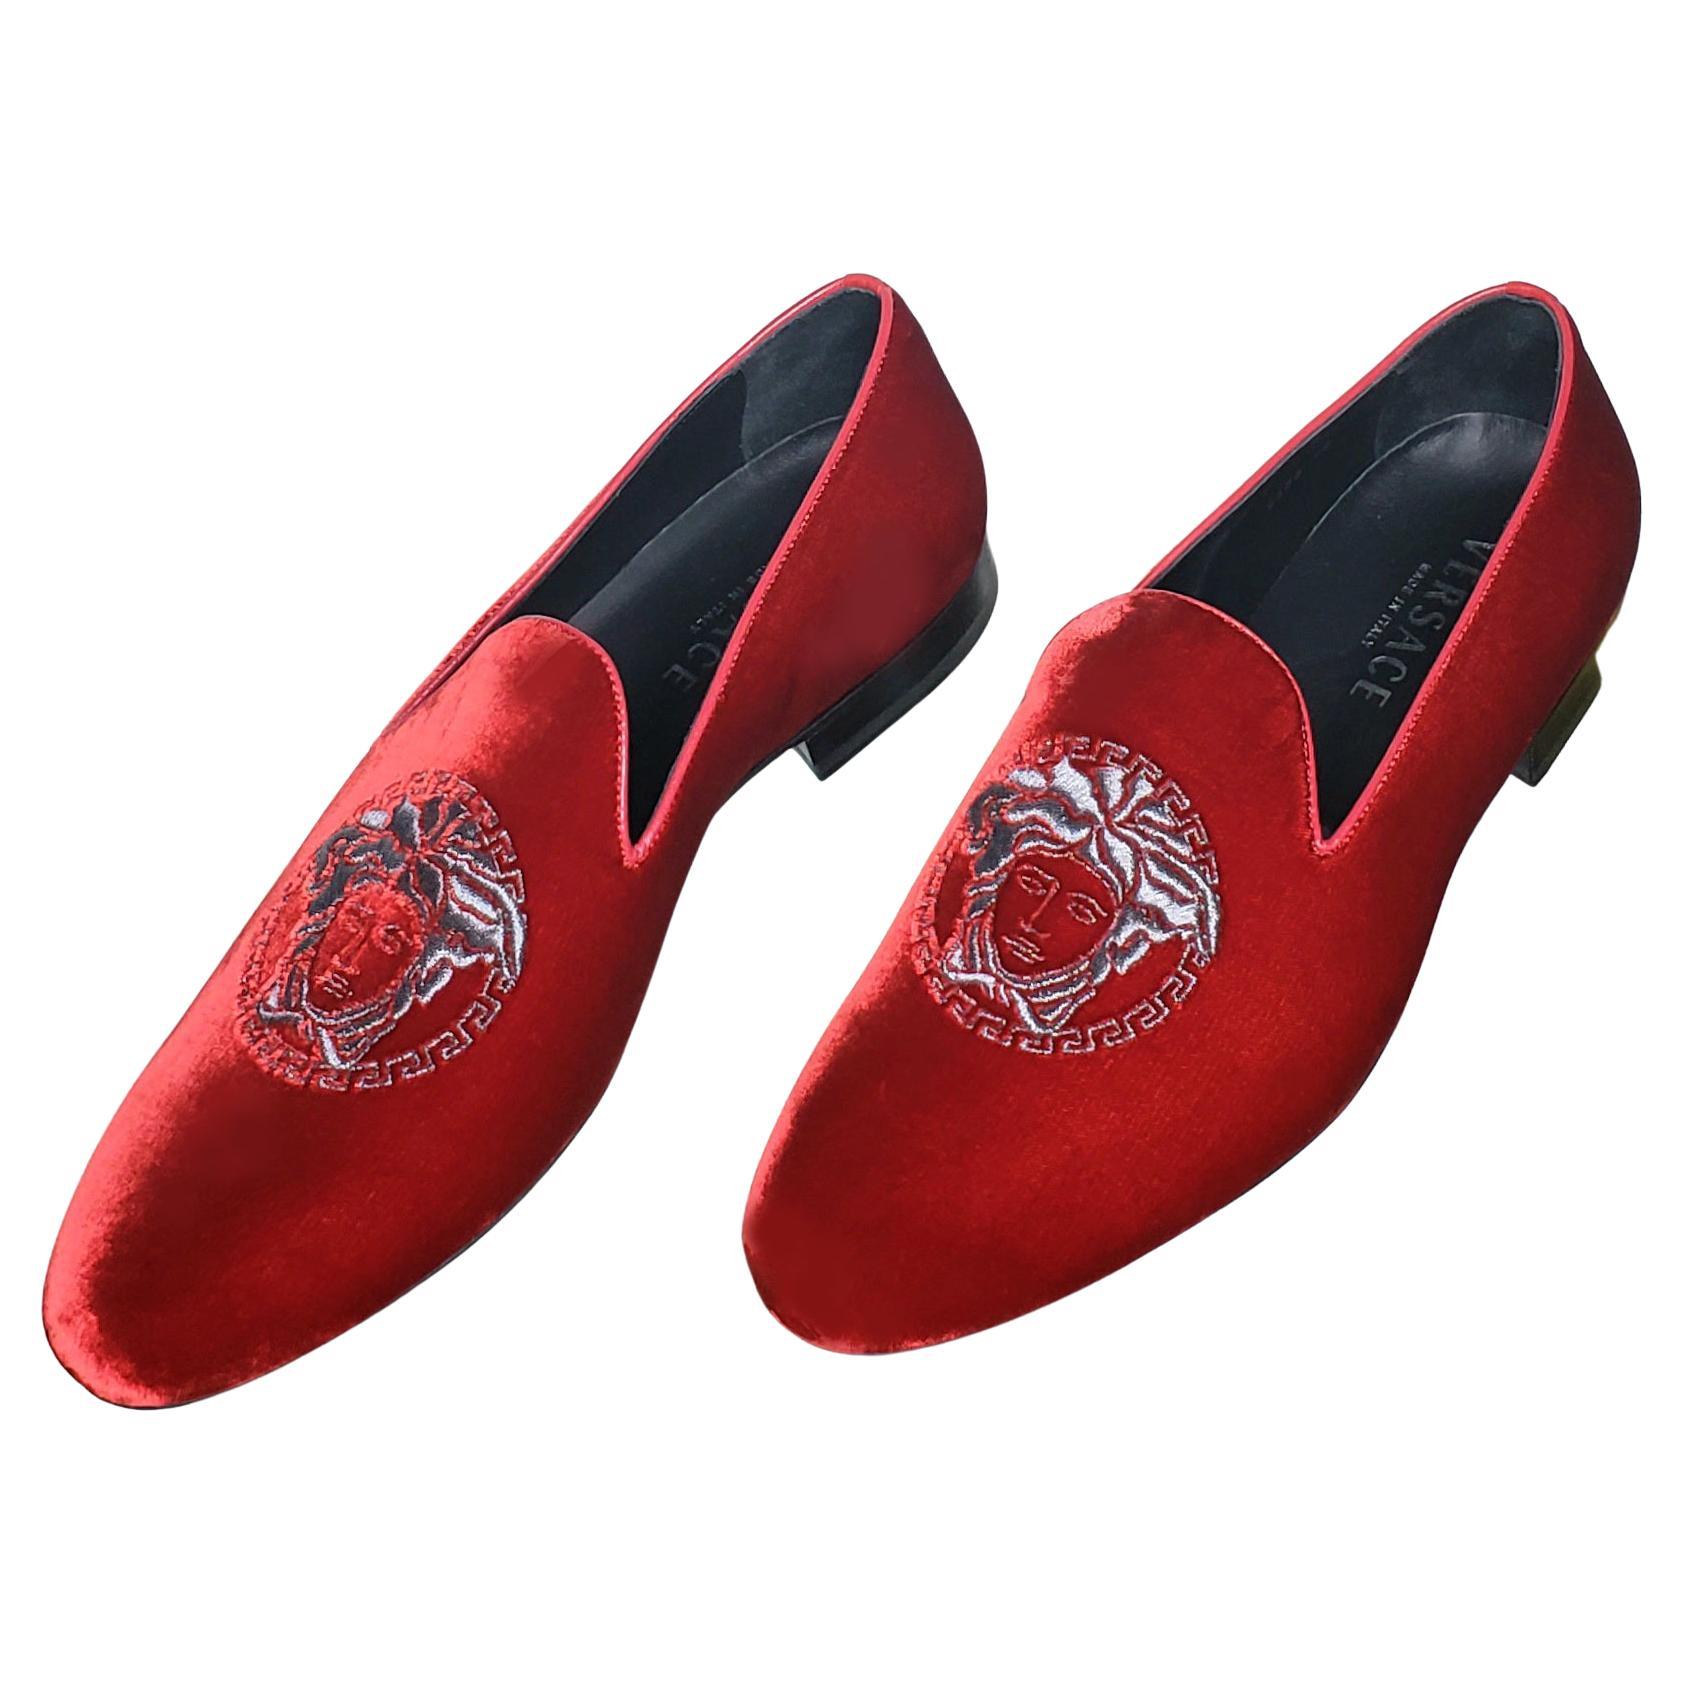 SOLD OUT!!! NEW VERSACE RED VELVET LOAFERS with PLATINUM MEDUSA EMBROIDERY 9.5